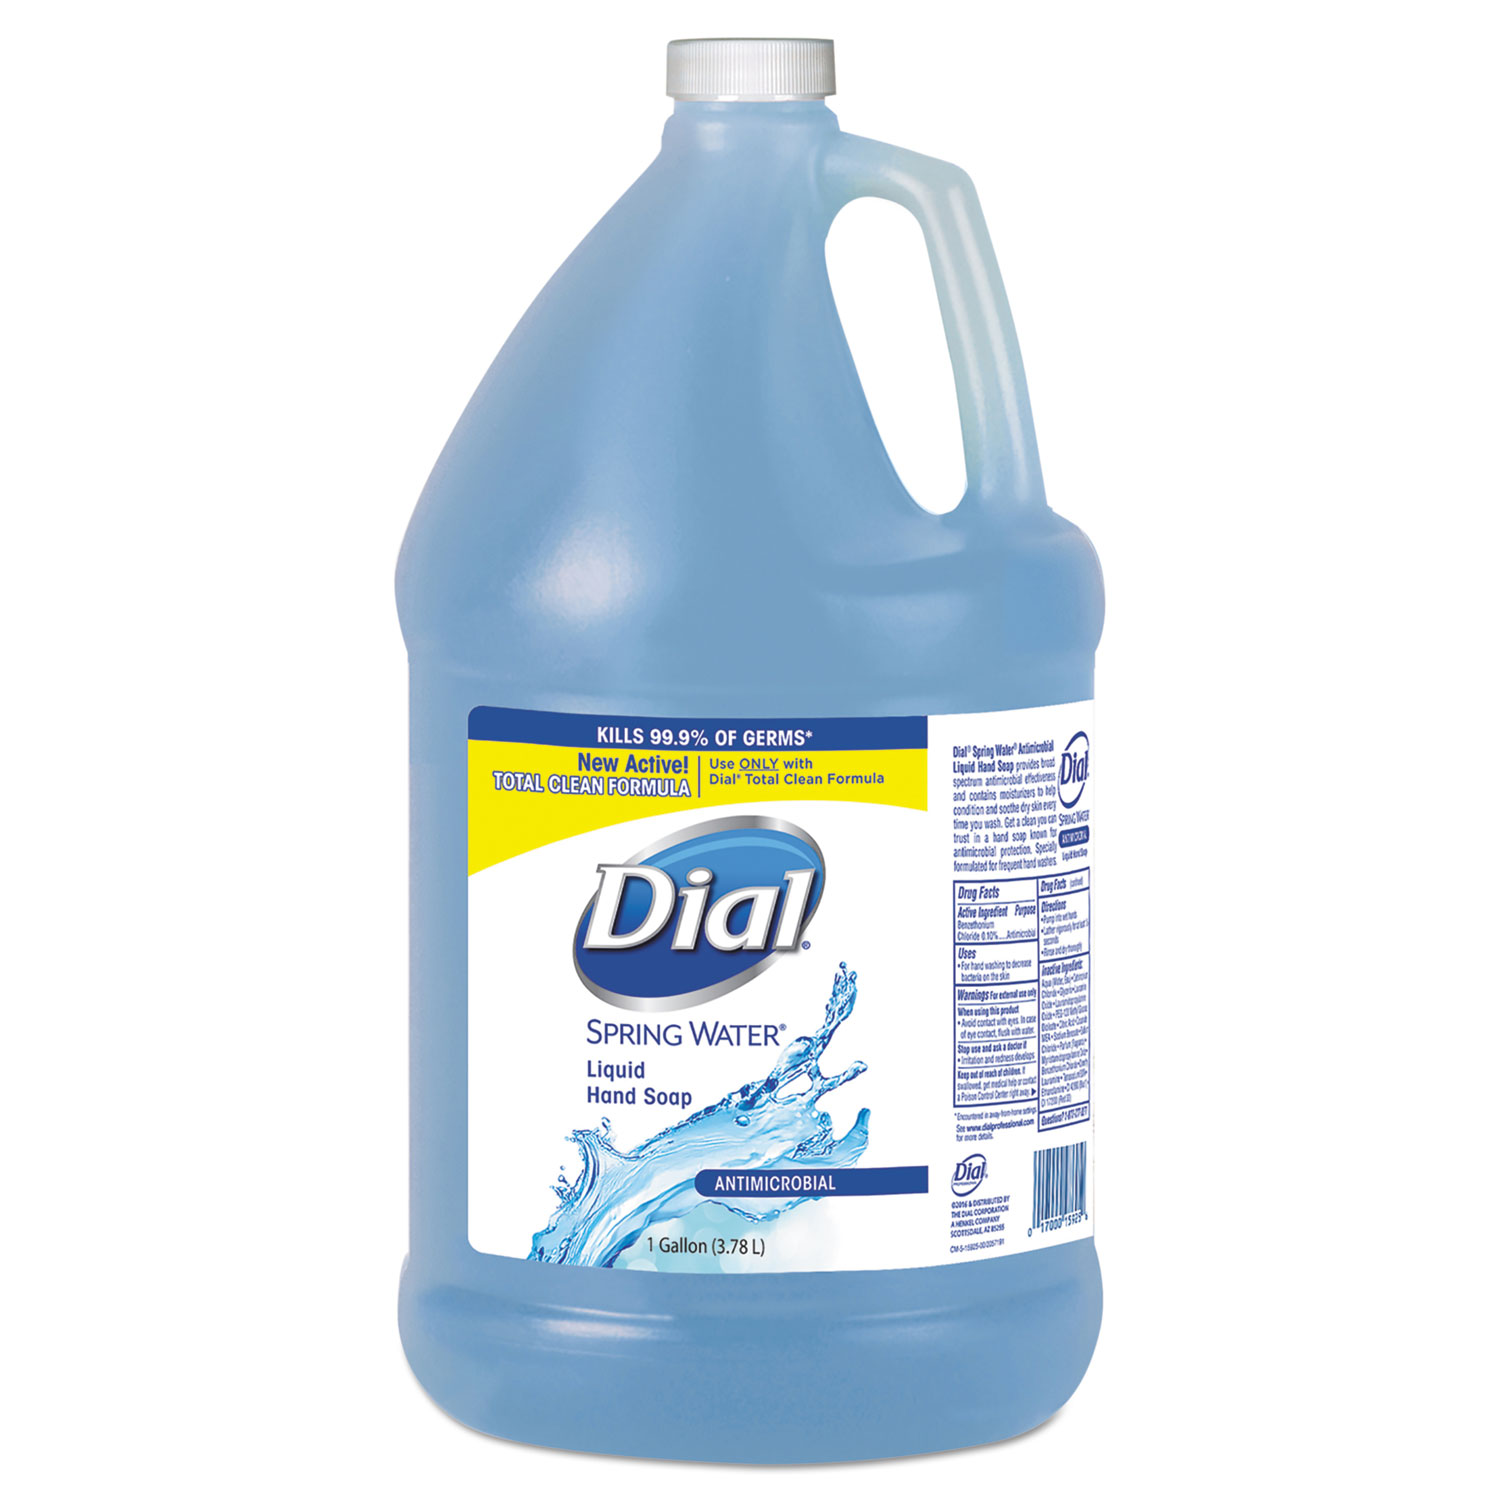  Dial DIA15926EA Antimicrobial Liquid Hand Soap, Spring Water Scent, 1 gal Bottle (DIA15926EA) 